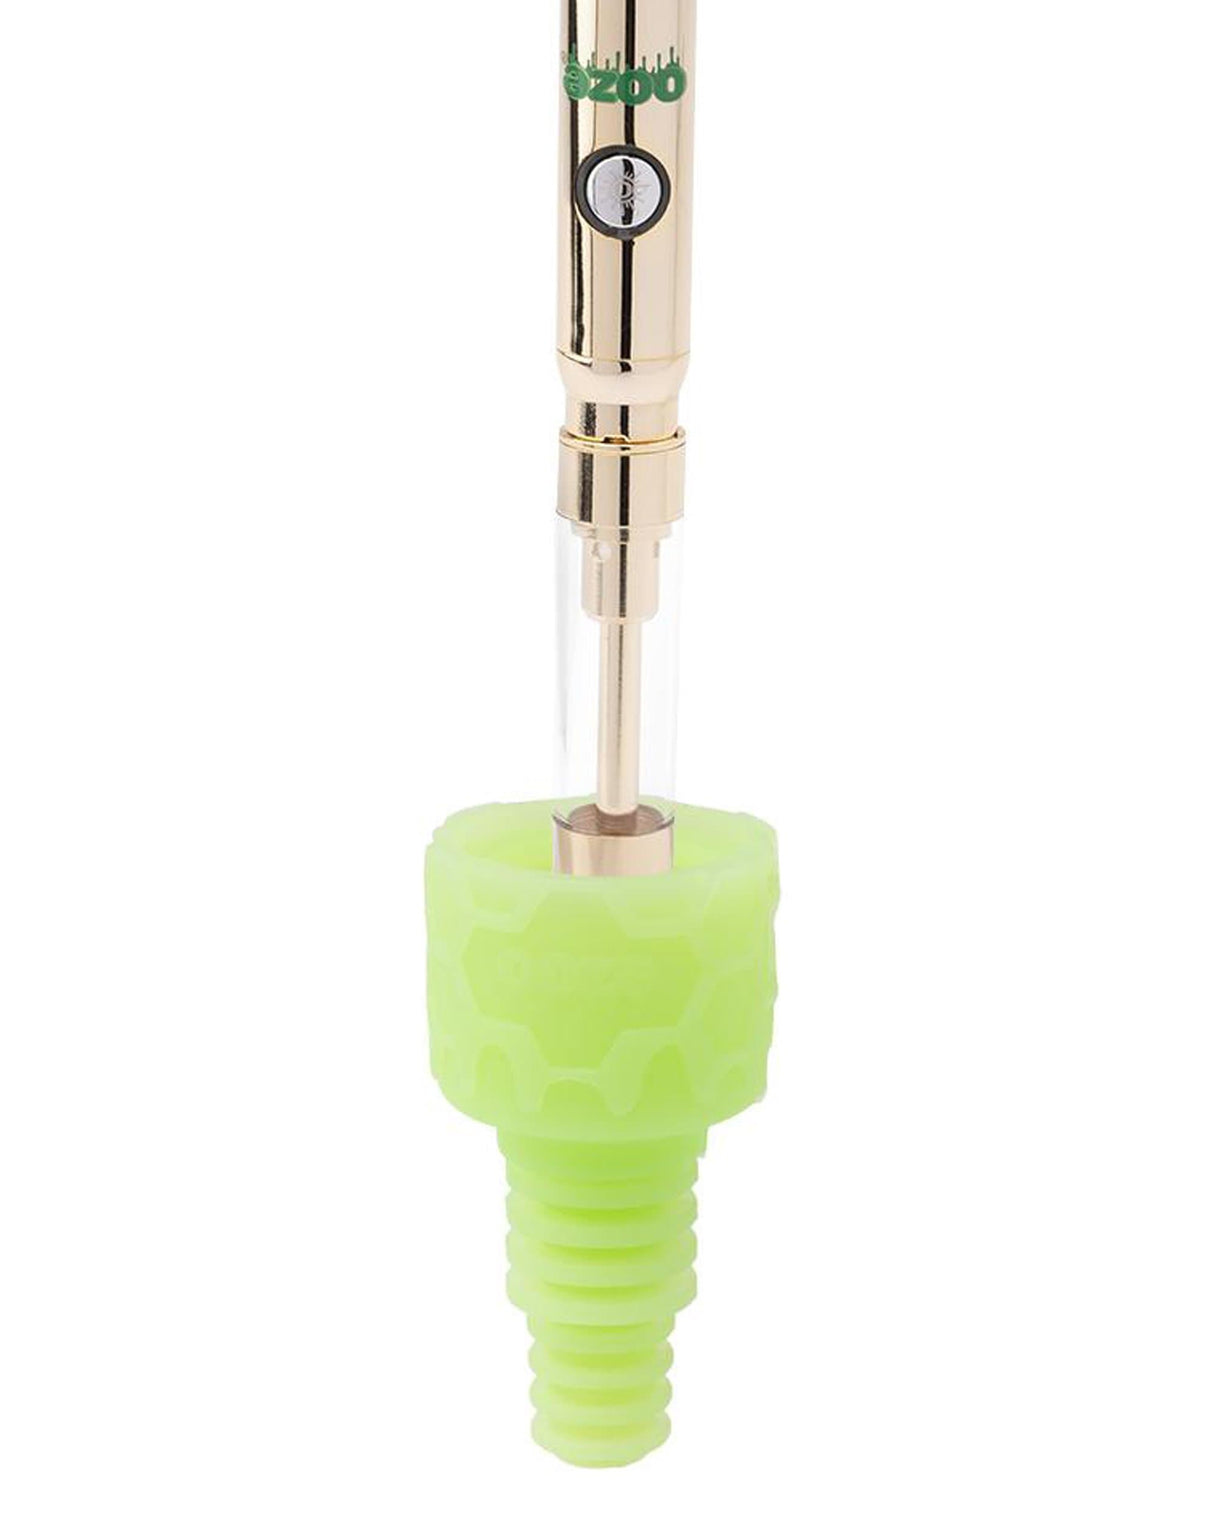 Ooze UFO Silicone Bong in Green, Slitted Percolator, Compact 7" Height, for Dry Herbs and Concentrates